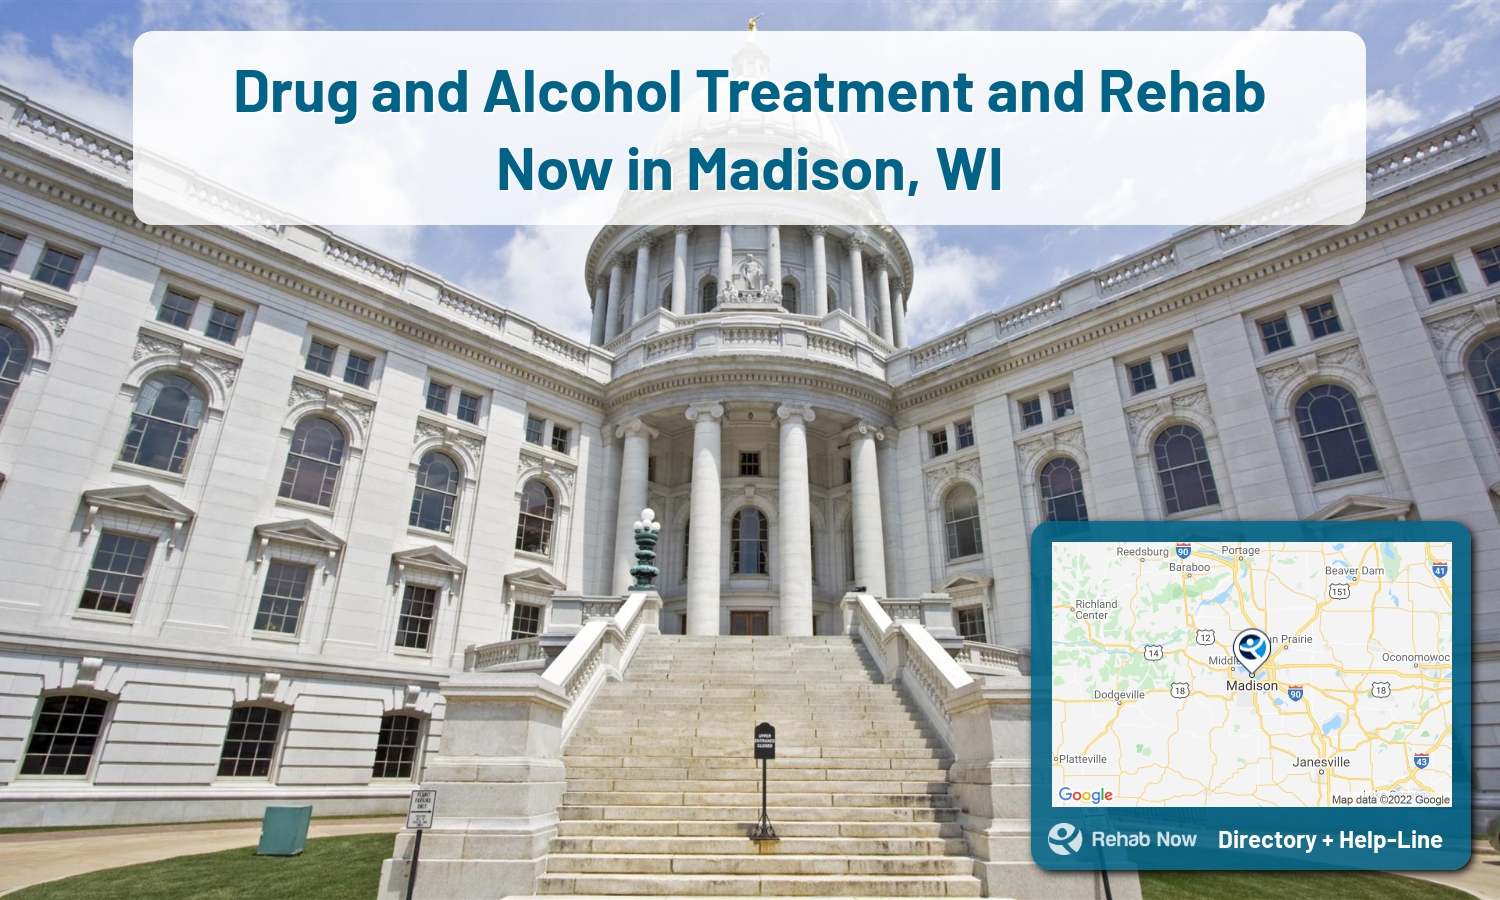 Madison, WI Treatment Centers. Find drug rehab in Madison, Wisconsin, or detox and treatment programs. Get the right help now!